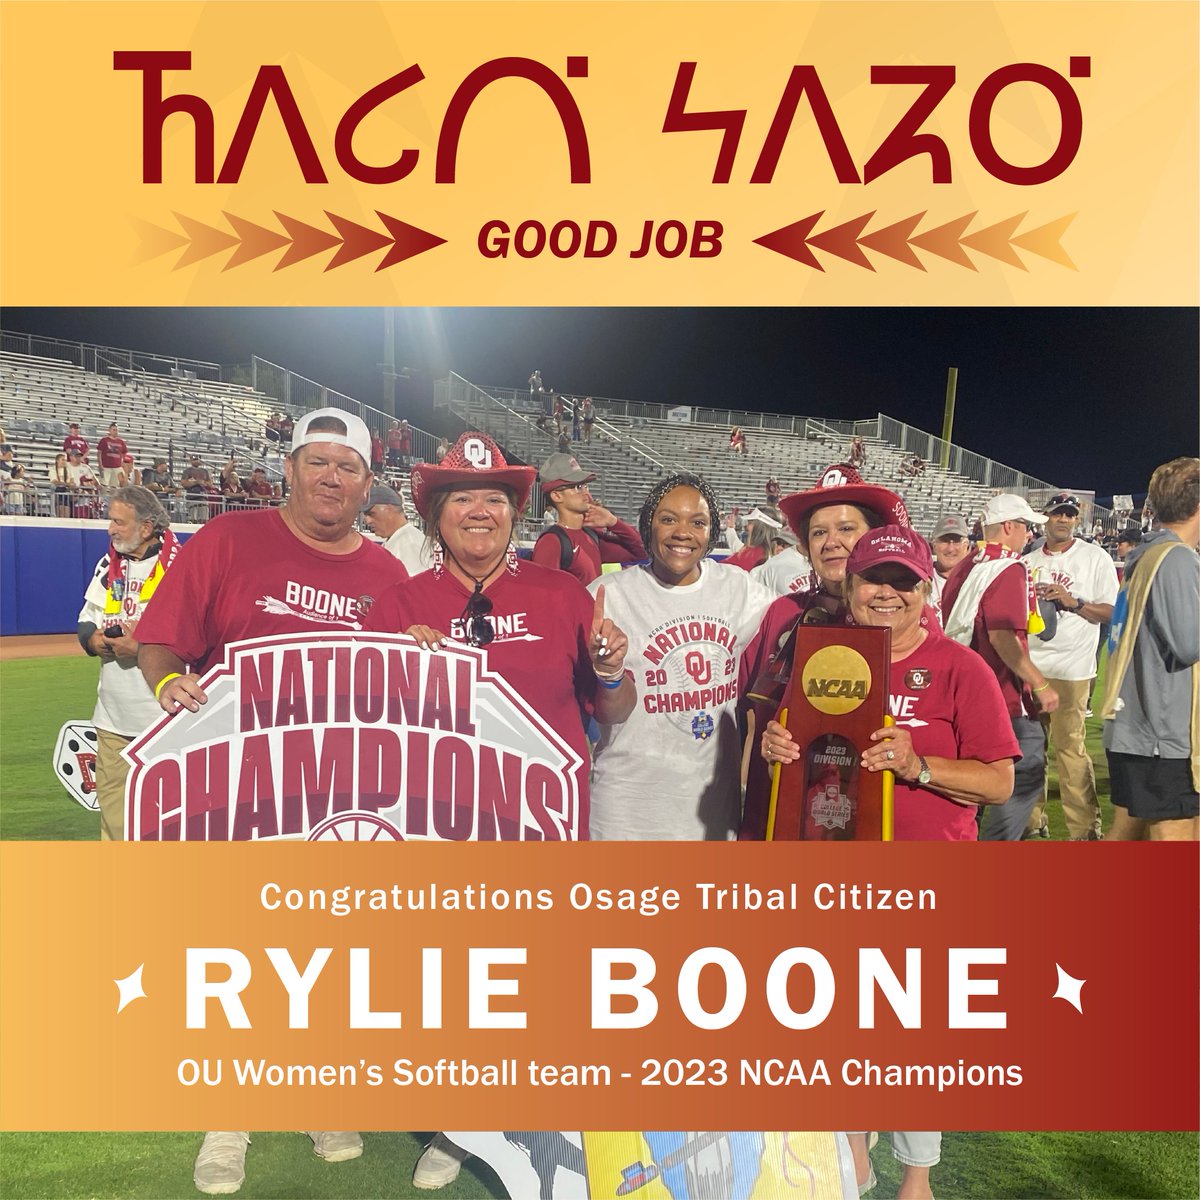 They did it again! Congratulations to Osage Rylie Boone (pictured with family) and the whole OU Women’s Softball organization for a three-peat NCAA Division Women’s Softball National Championship victory. 𐓵𐓘𐓧𐓣 𐓷𐓘𐓻𐓪͘ | GOOD JOB